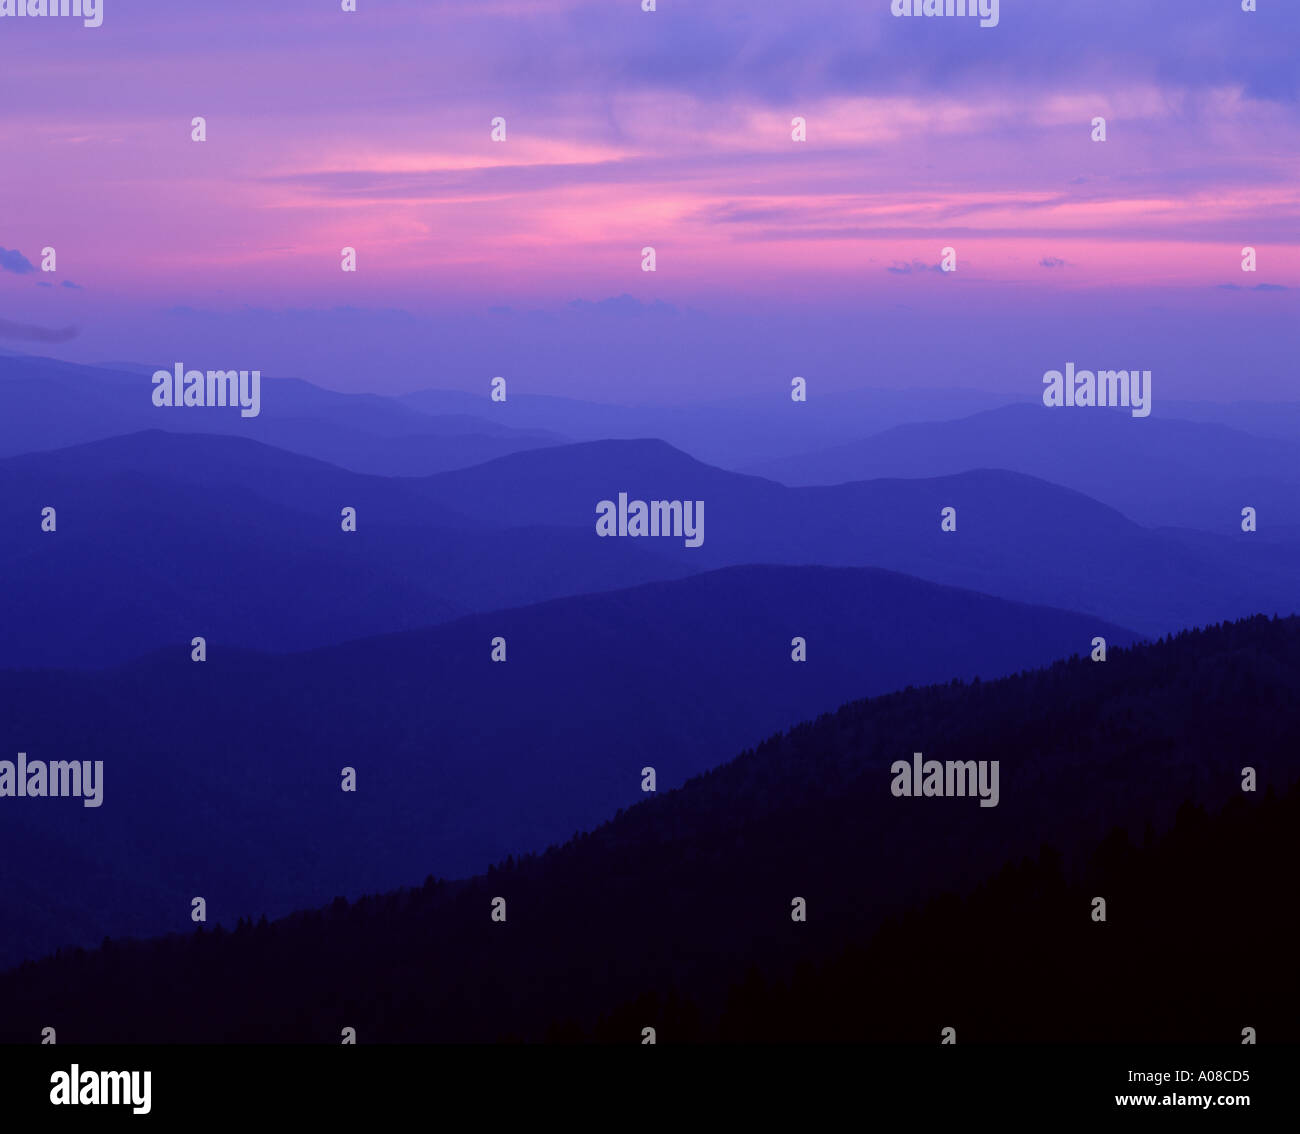 Sunset in aThe Great Smoky Mountains National Park Stock Photo